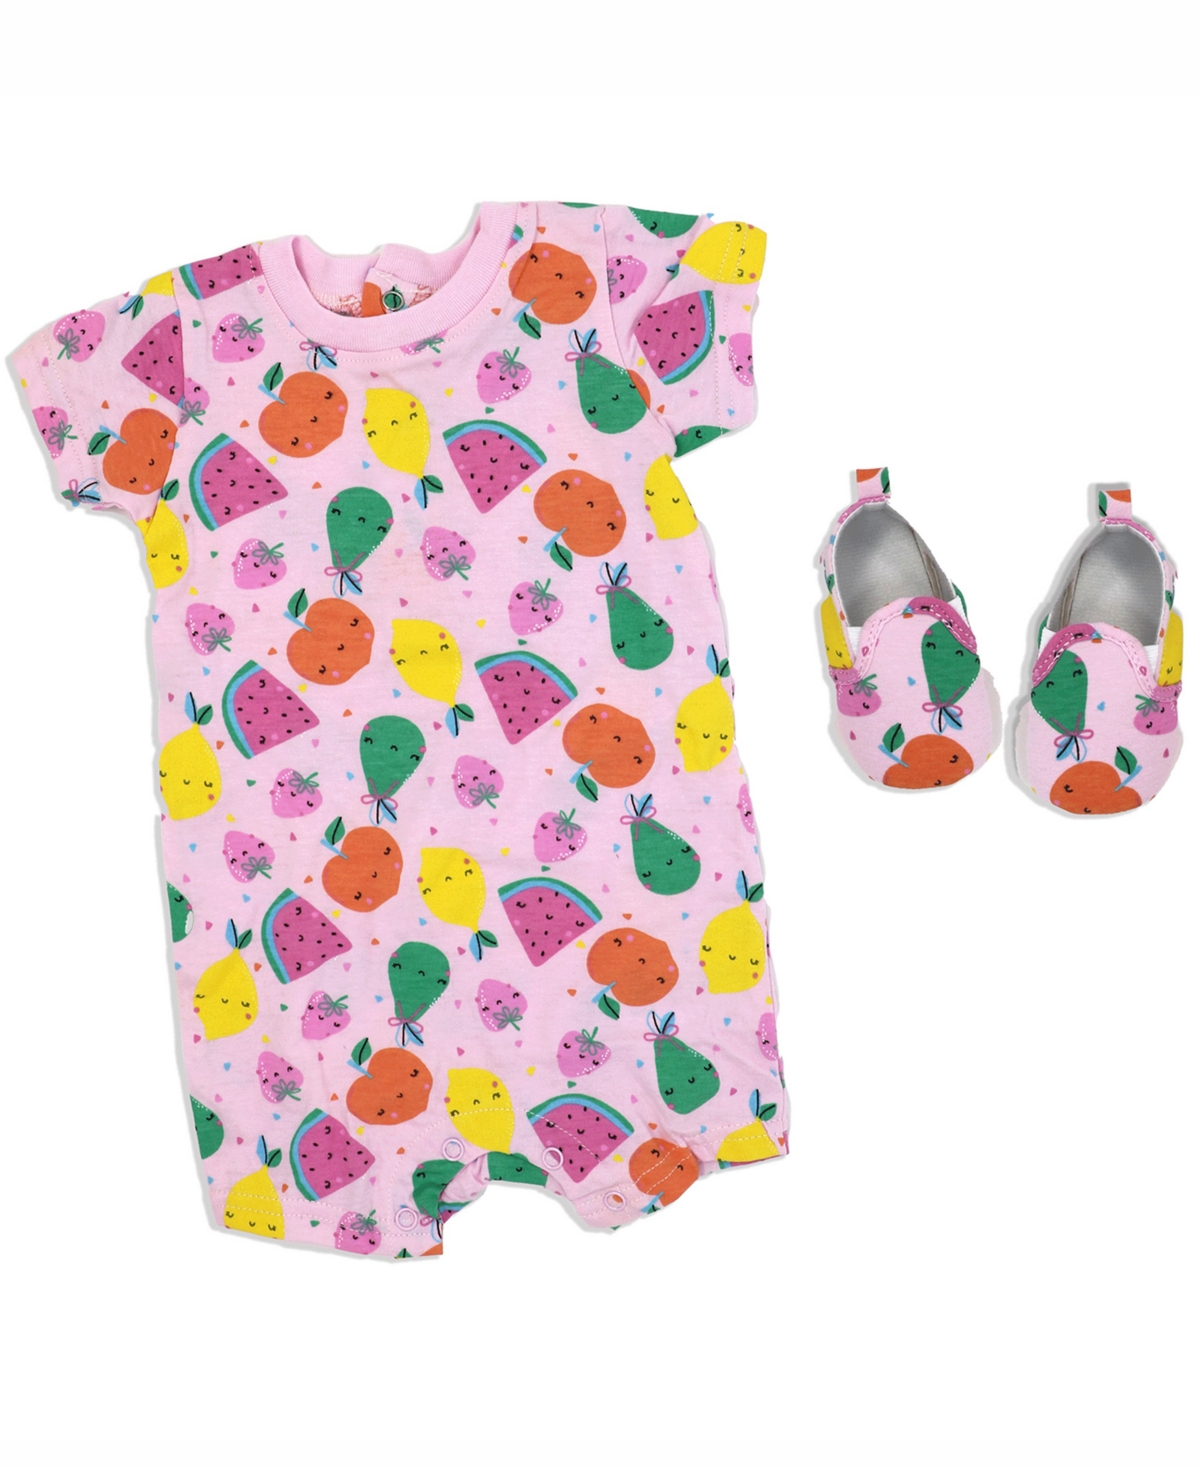 Lily & Jack Baby Girls Fruity Short Sleeved Romper And Shoes, 2 Piece Set In Pink